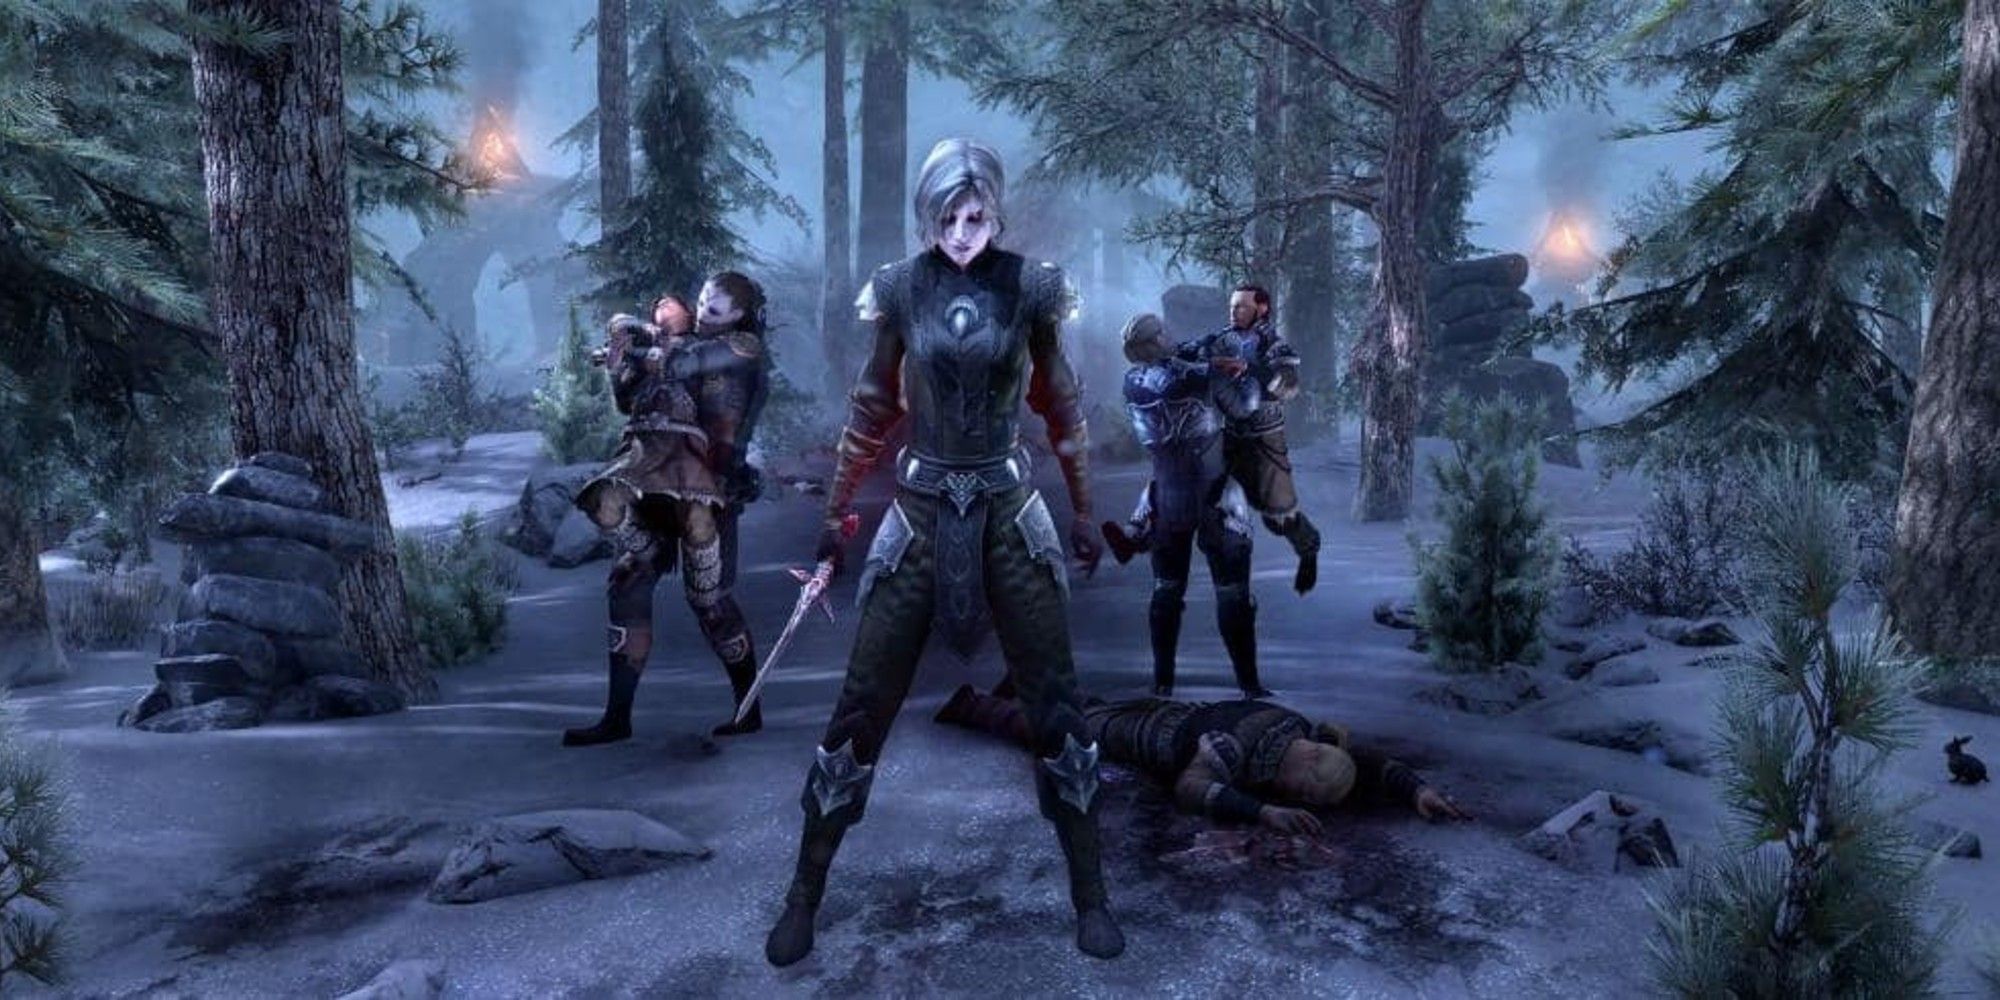 A clan of vampires attacks a travelling party in the snow in Skyrim